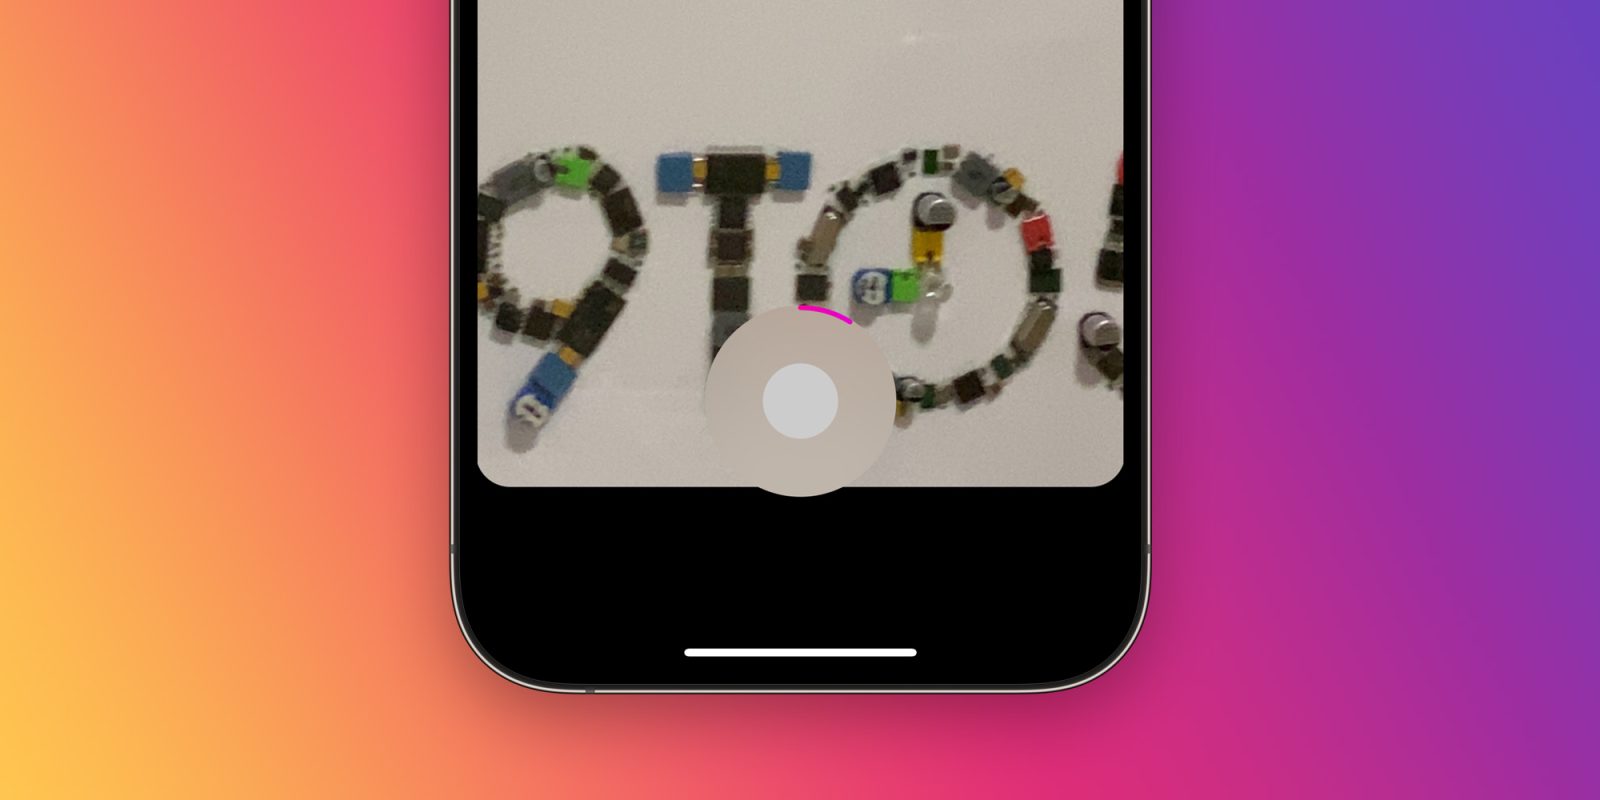 Instagram bug causes exaggerated zooming while recording stories; here's a workaround